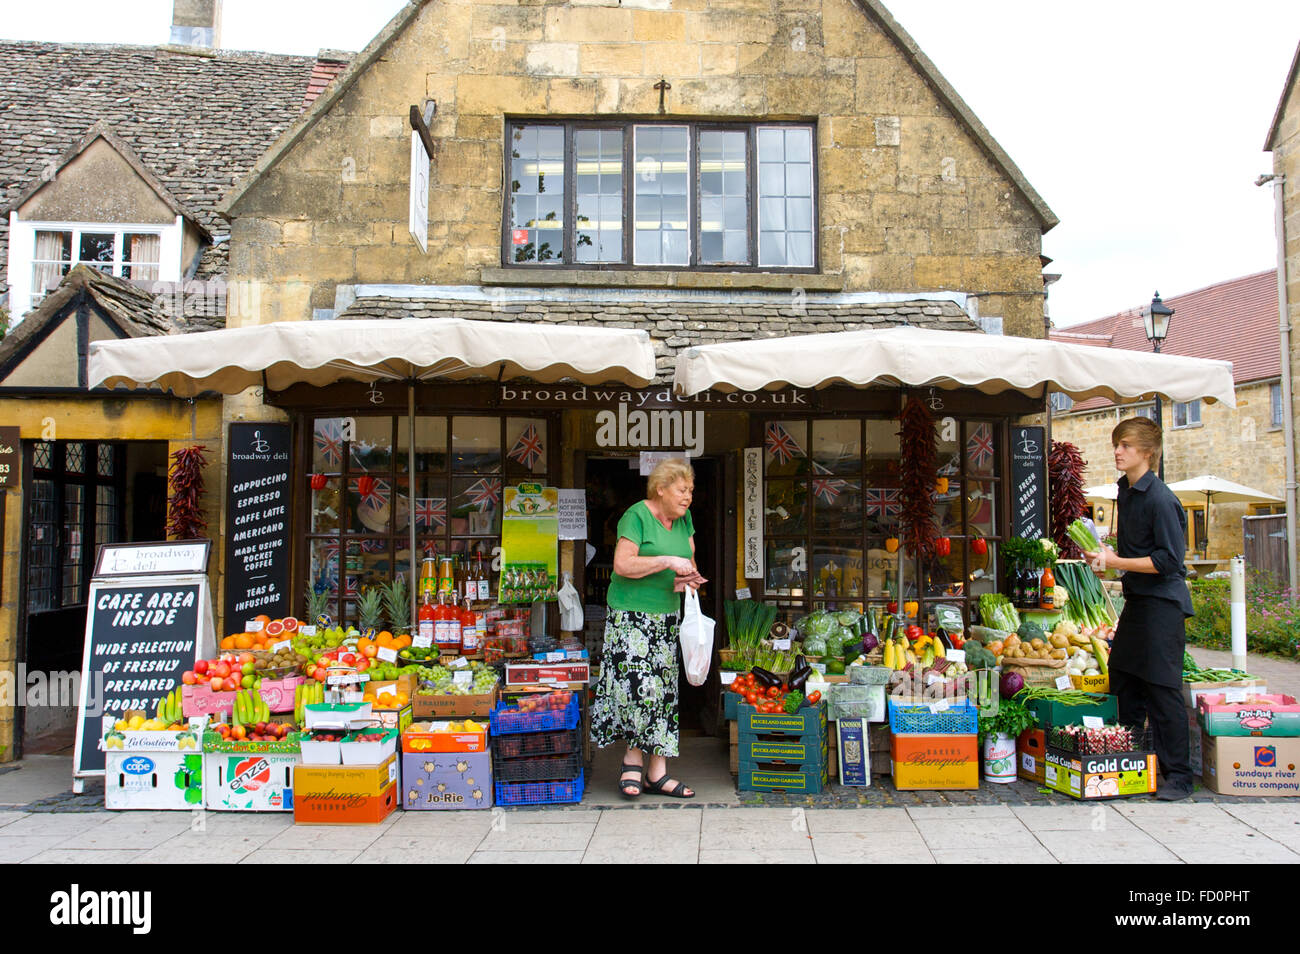 An elderly lady and shop keeper at broadwaydeli shop on the High Street in Broadway village centre, Cotswolds, UK. Stock Photo